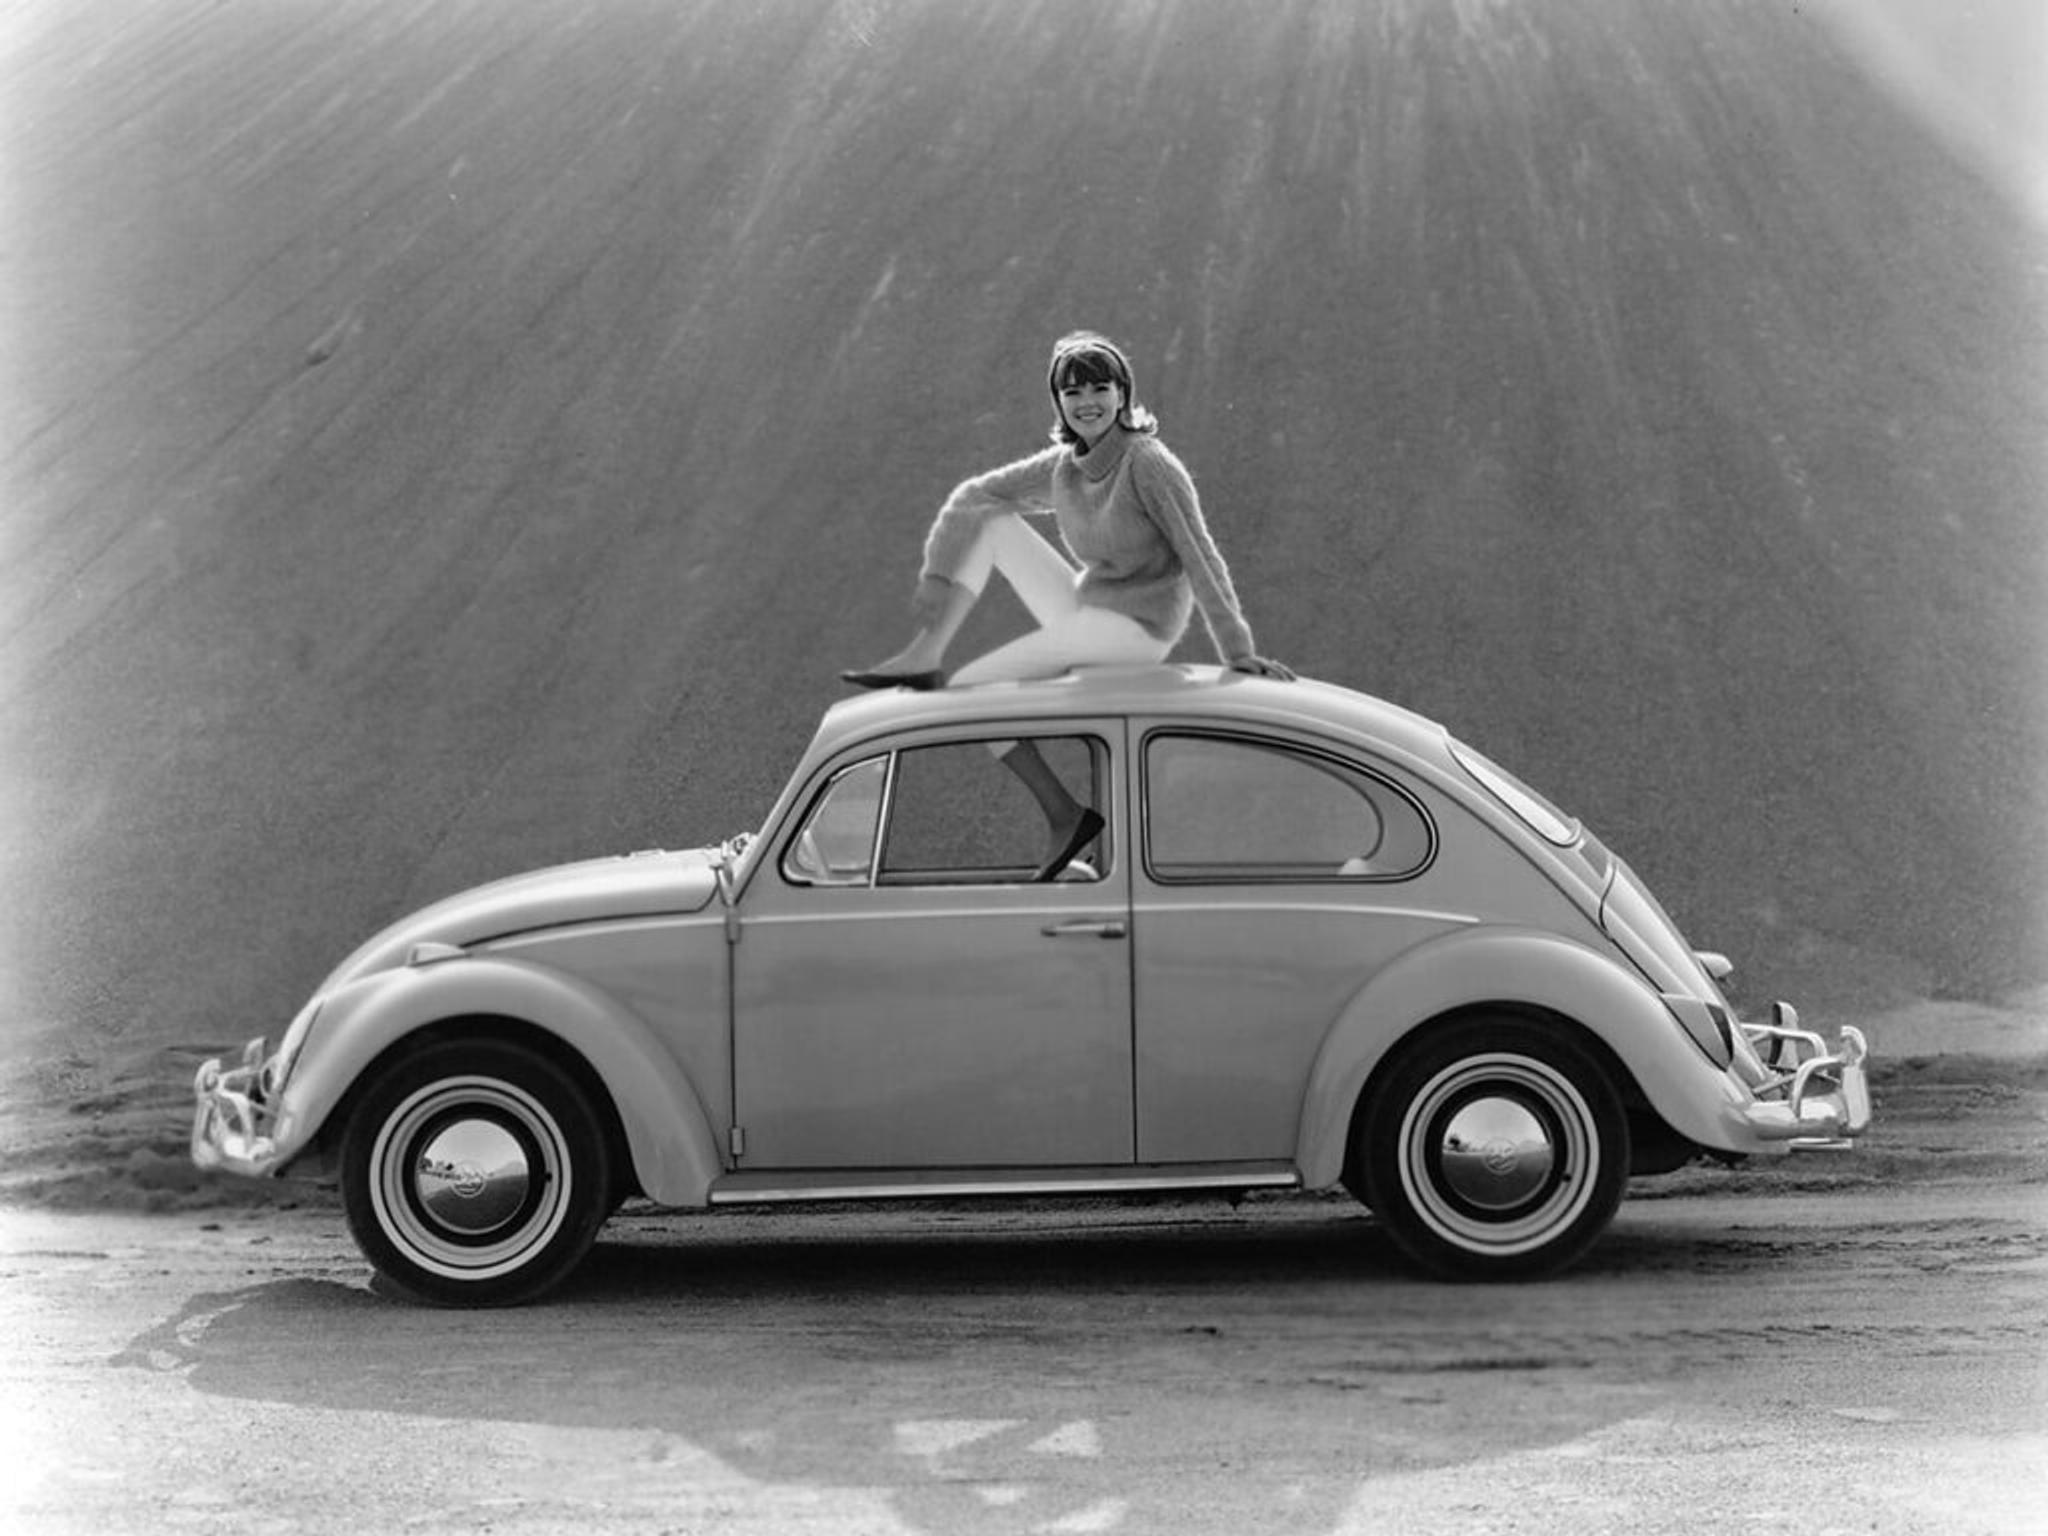 Woman sitting on the roof of Volkswagen Beetle